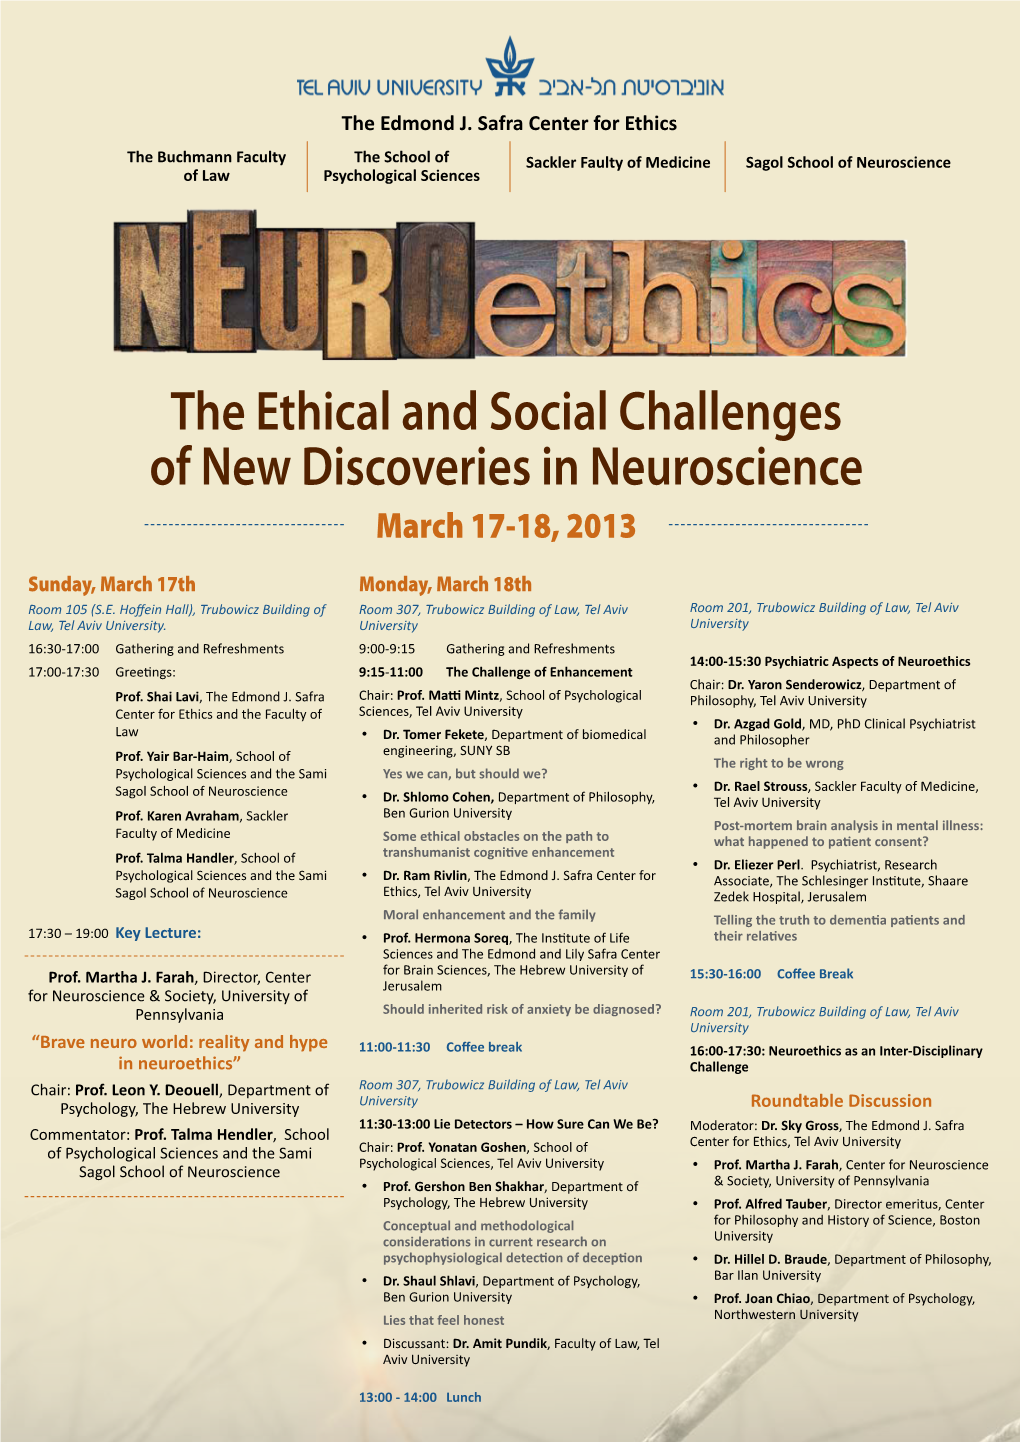 The Ethical and Social Challenges of New Discoveries in Neuroscience March 17-18, 2013